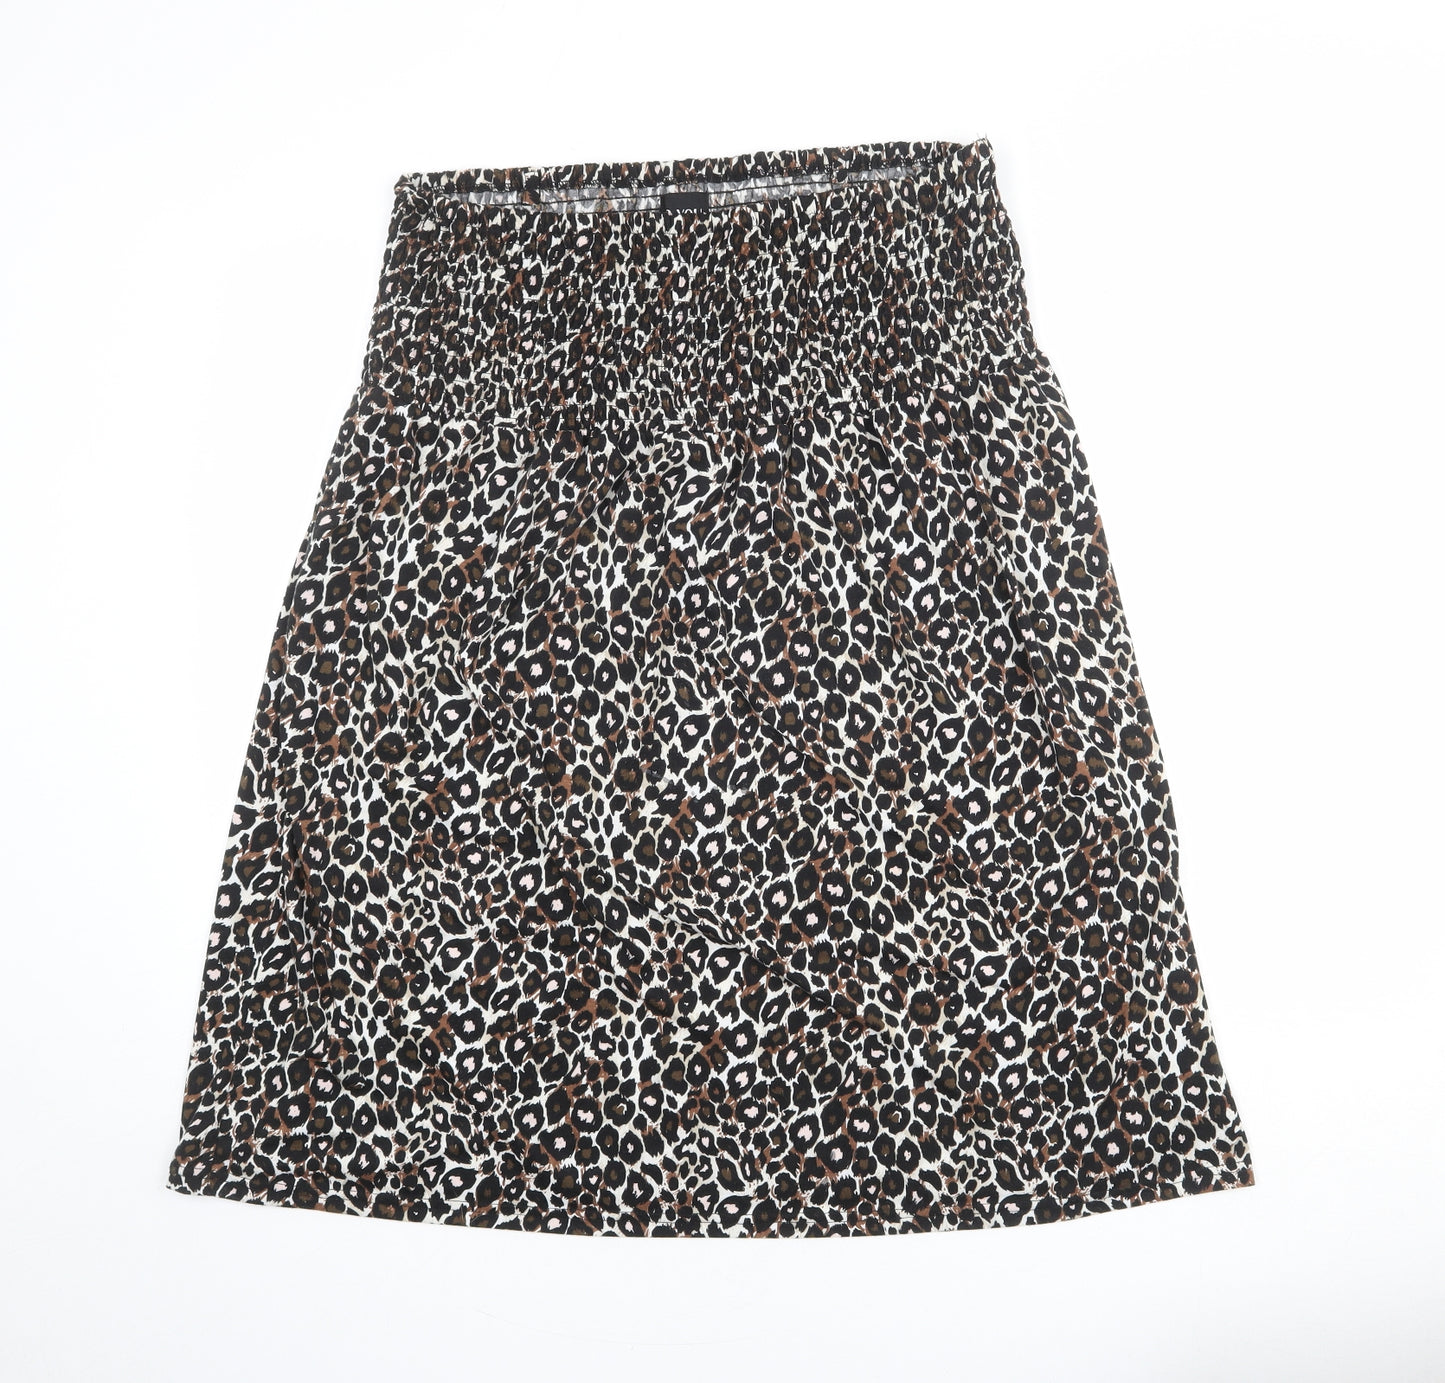 B.You Womens Multicoloured Animal Print Polyester A-Line Skirt Size 20 - Leopard pattern Size 20-22